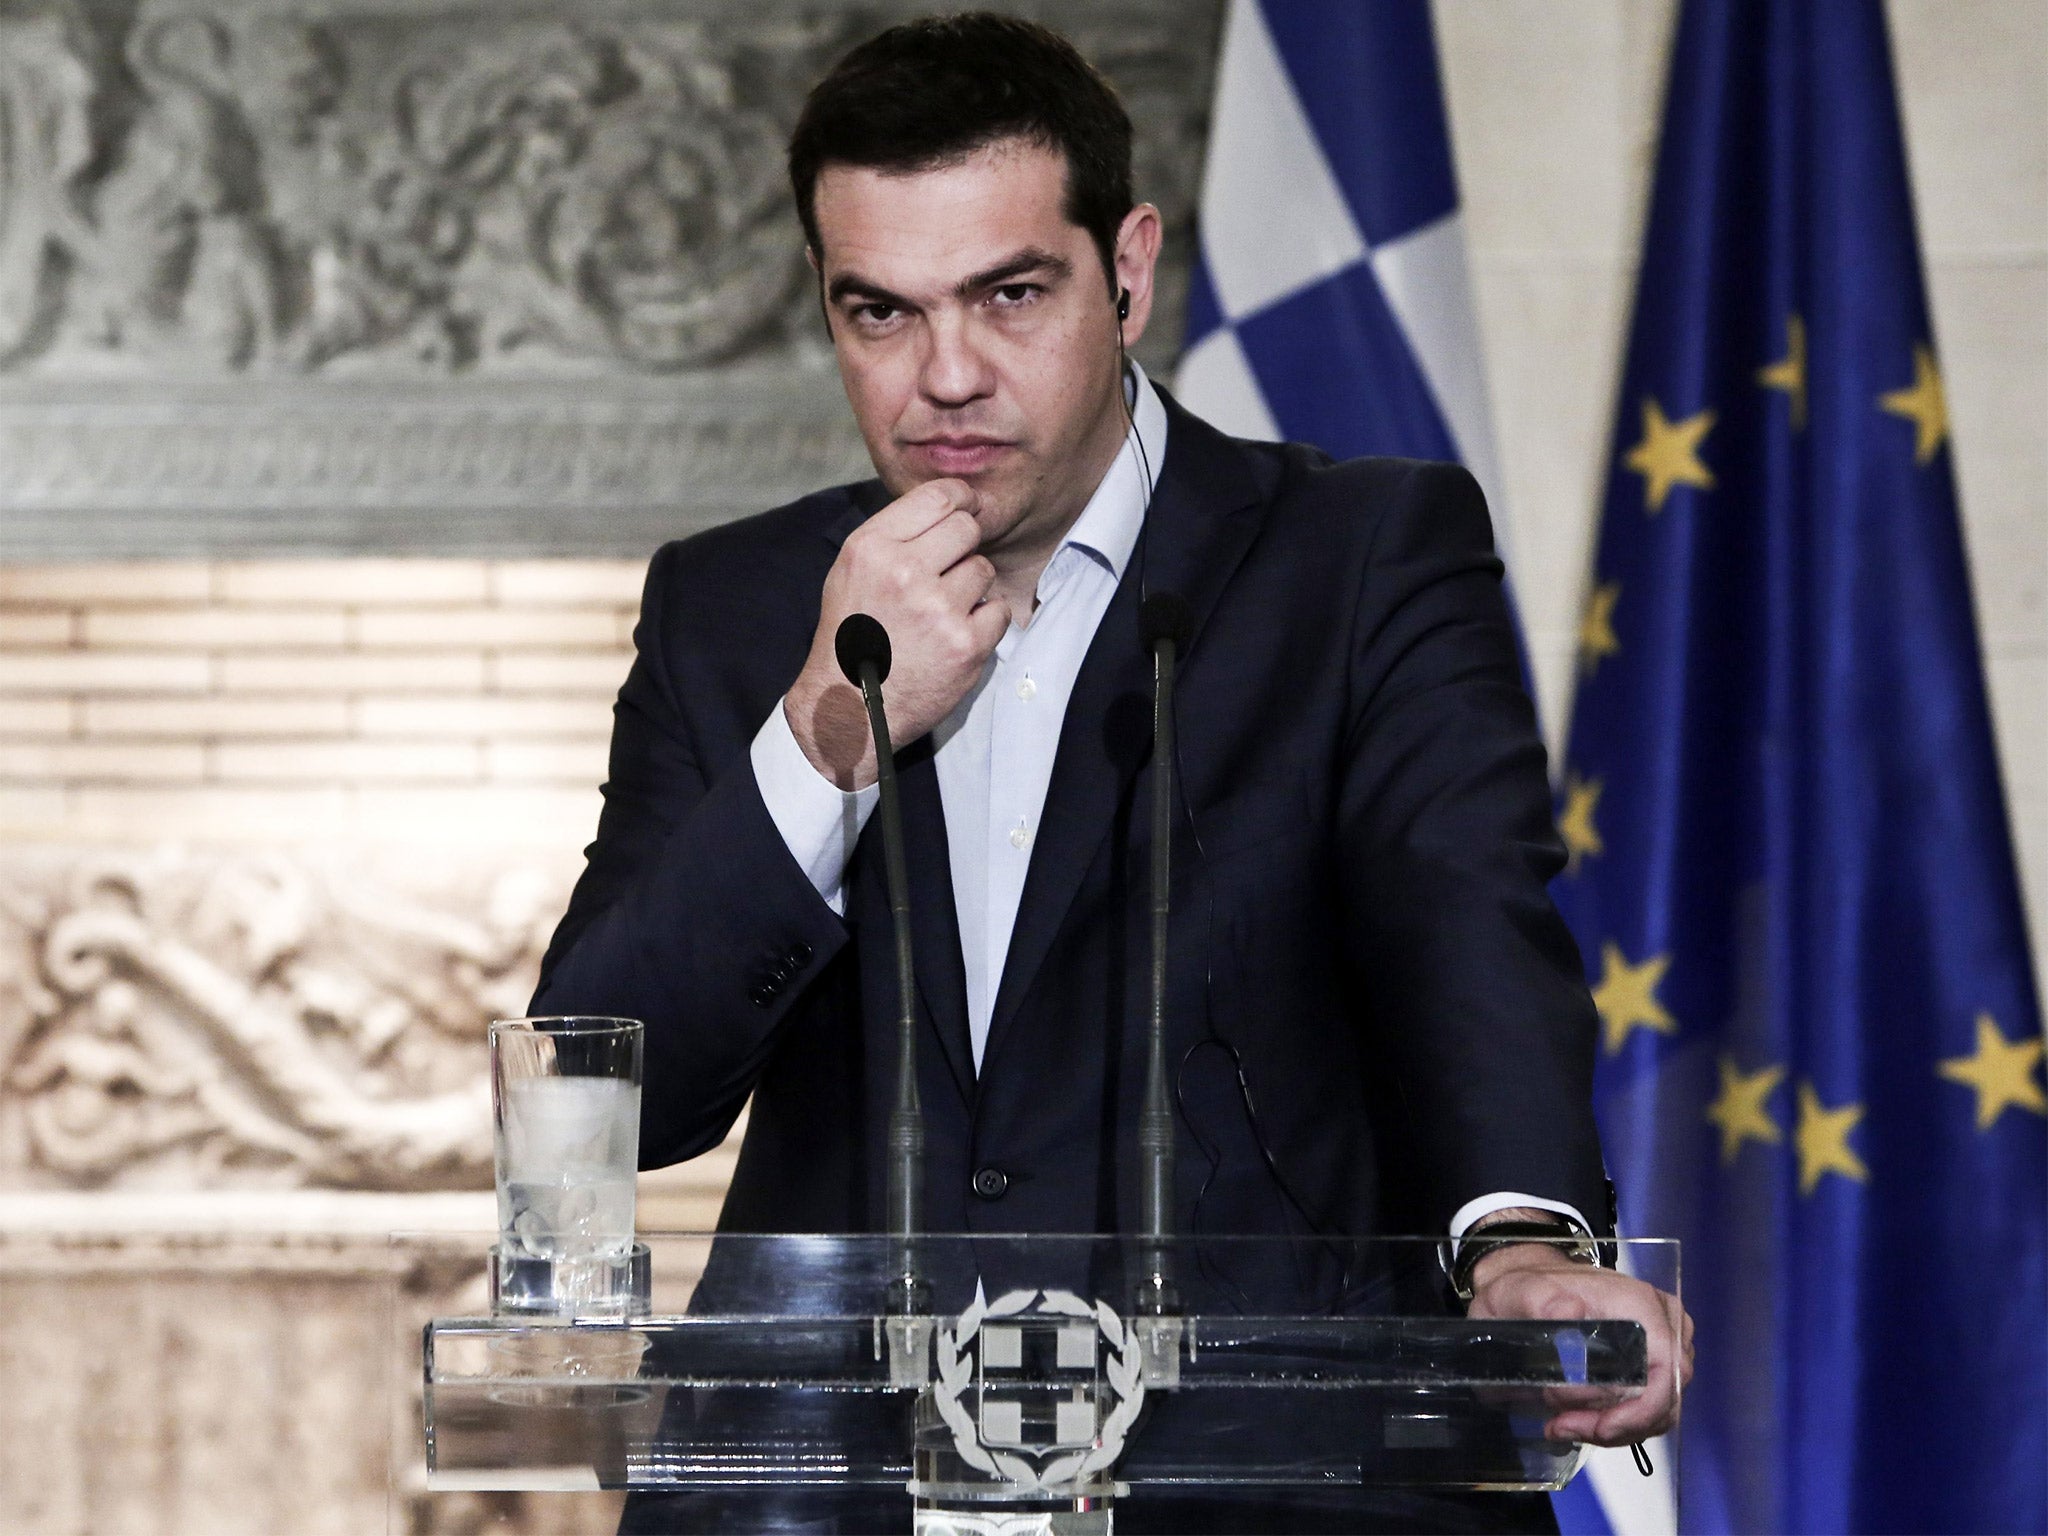 Greek Prime Minister Alexis Tsipras accused creditors of ‘pillaging’ his country